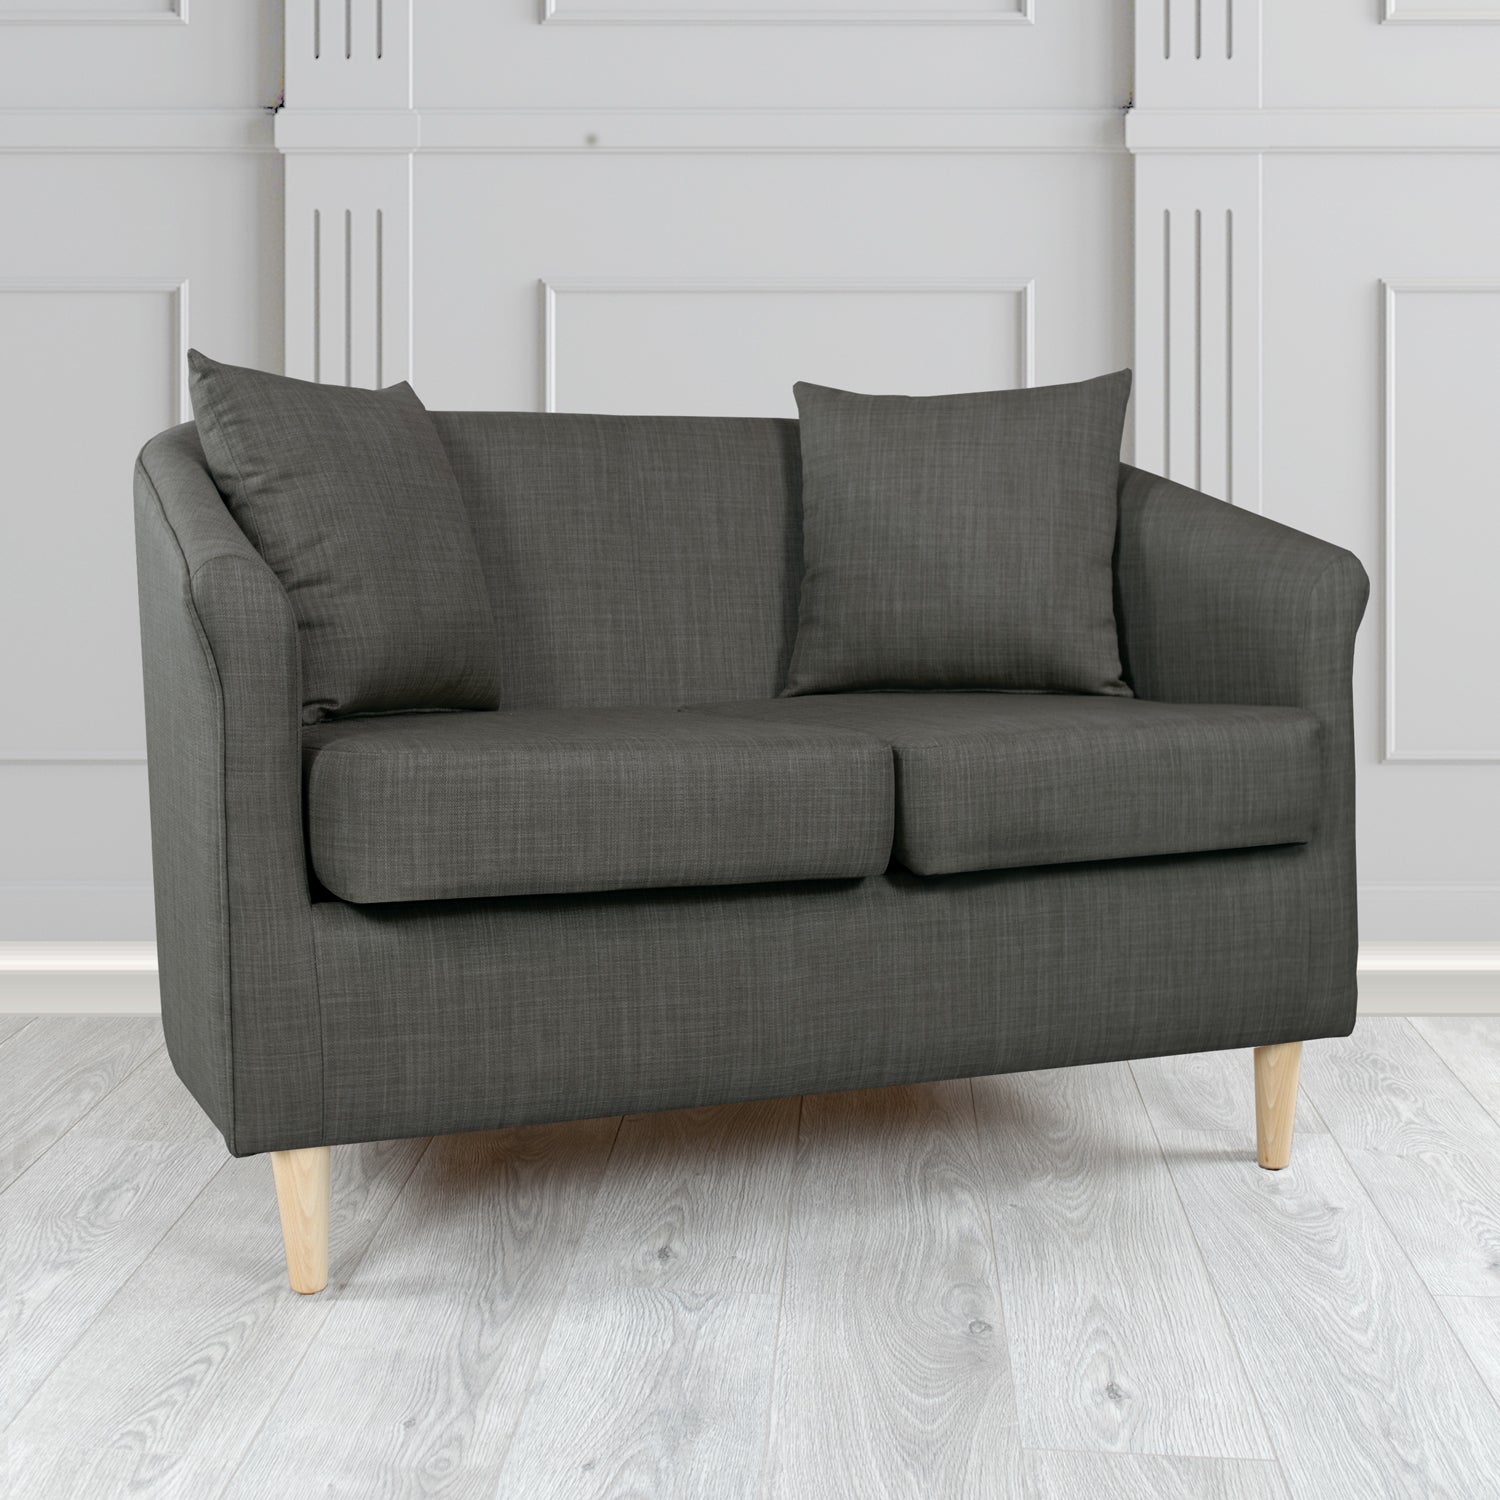 St Tropez Charles Charcoal Plain Linen Fabric 2 Seater Tub Sofa with Scatter Cushions - The Tub Chair Shop